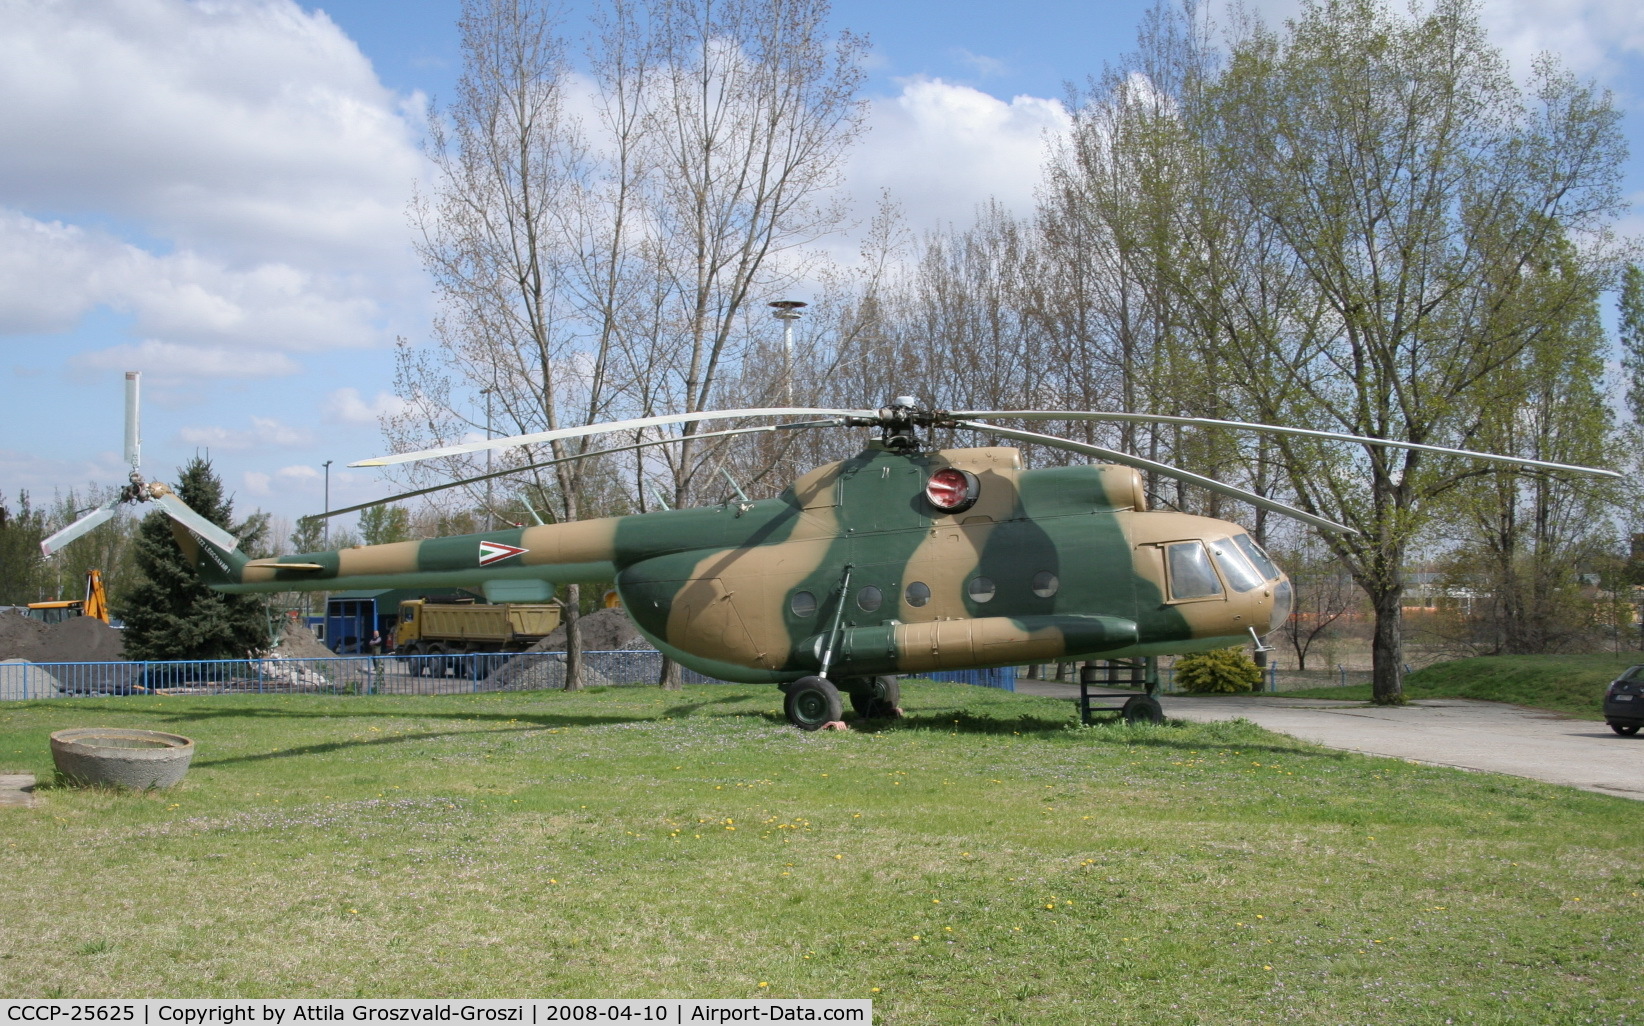 CCCP-25625, Mil Mi-8T Hip C/N 9775212, Csepel, Lajos Kossuth Grammar school apprentice workshop's yard - Hungary - Displayed in Hungary - Air Force colours but this Mi-8 never flew for the Air Force. It is an ex Aeroflot Mi-8 and it was repainted here in the technical school